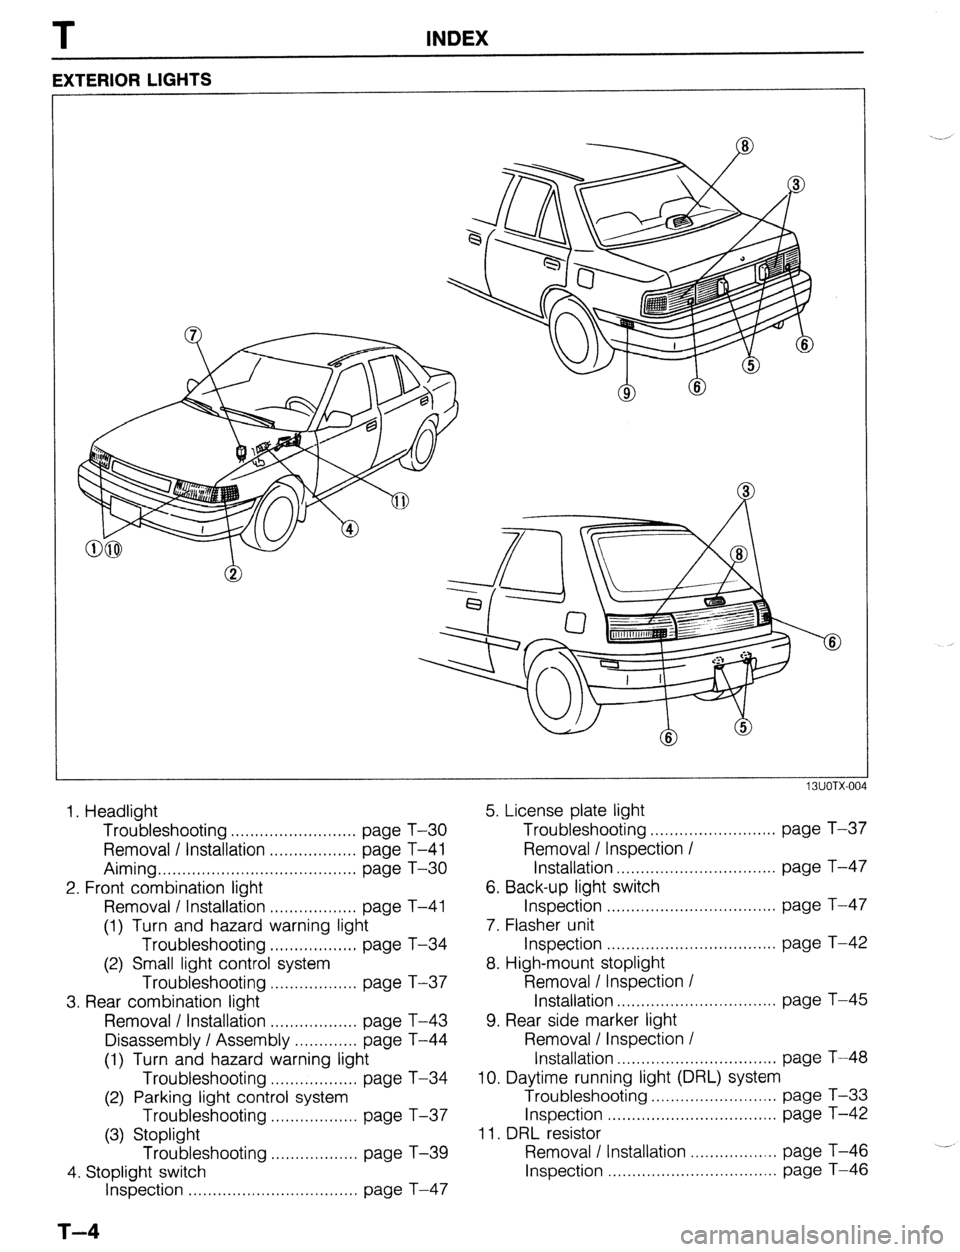 MAZDA PROTEGE 1992  Workshop Manual T INDEX 
EXTERIOR LIGHTS 
1. Headlight 
Troubleshooting .......................... page T-30 
Removal / Installation .................. page T-41 
Aiming ......................................... page